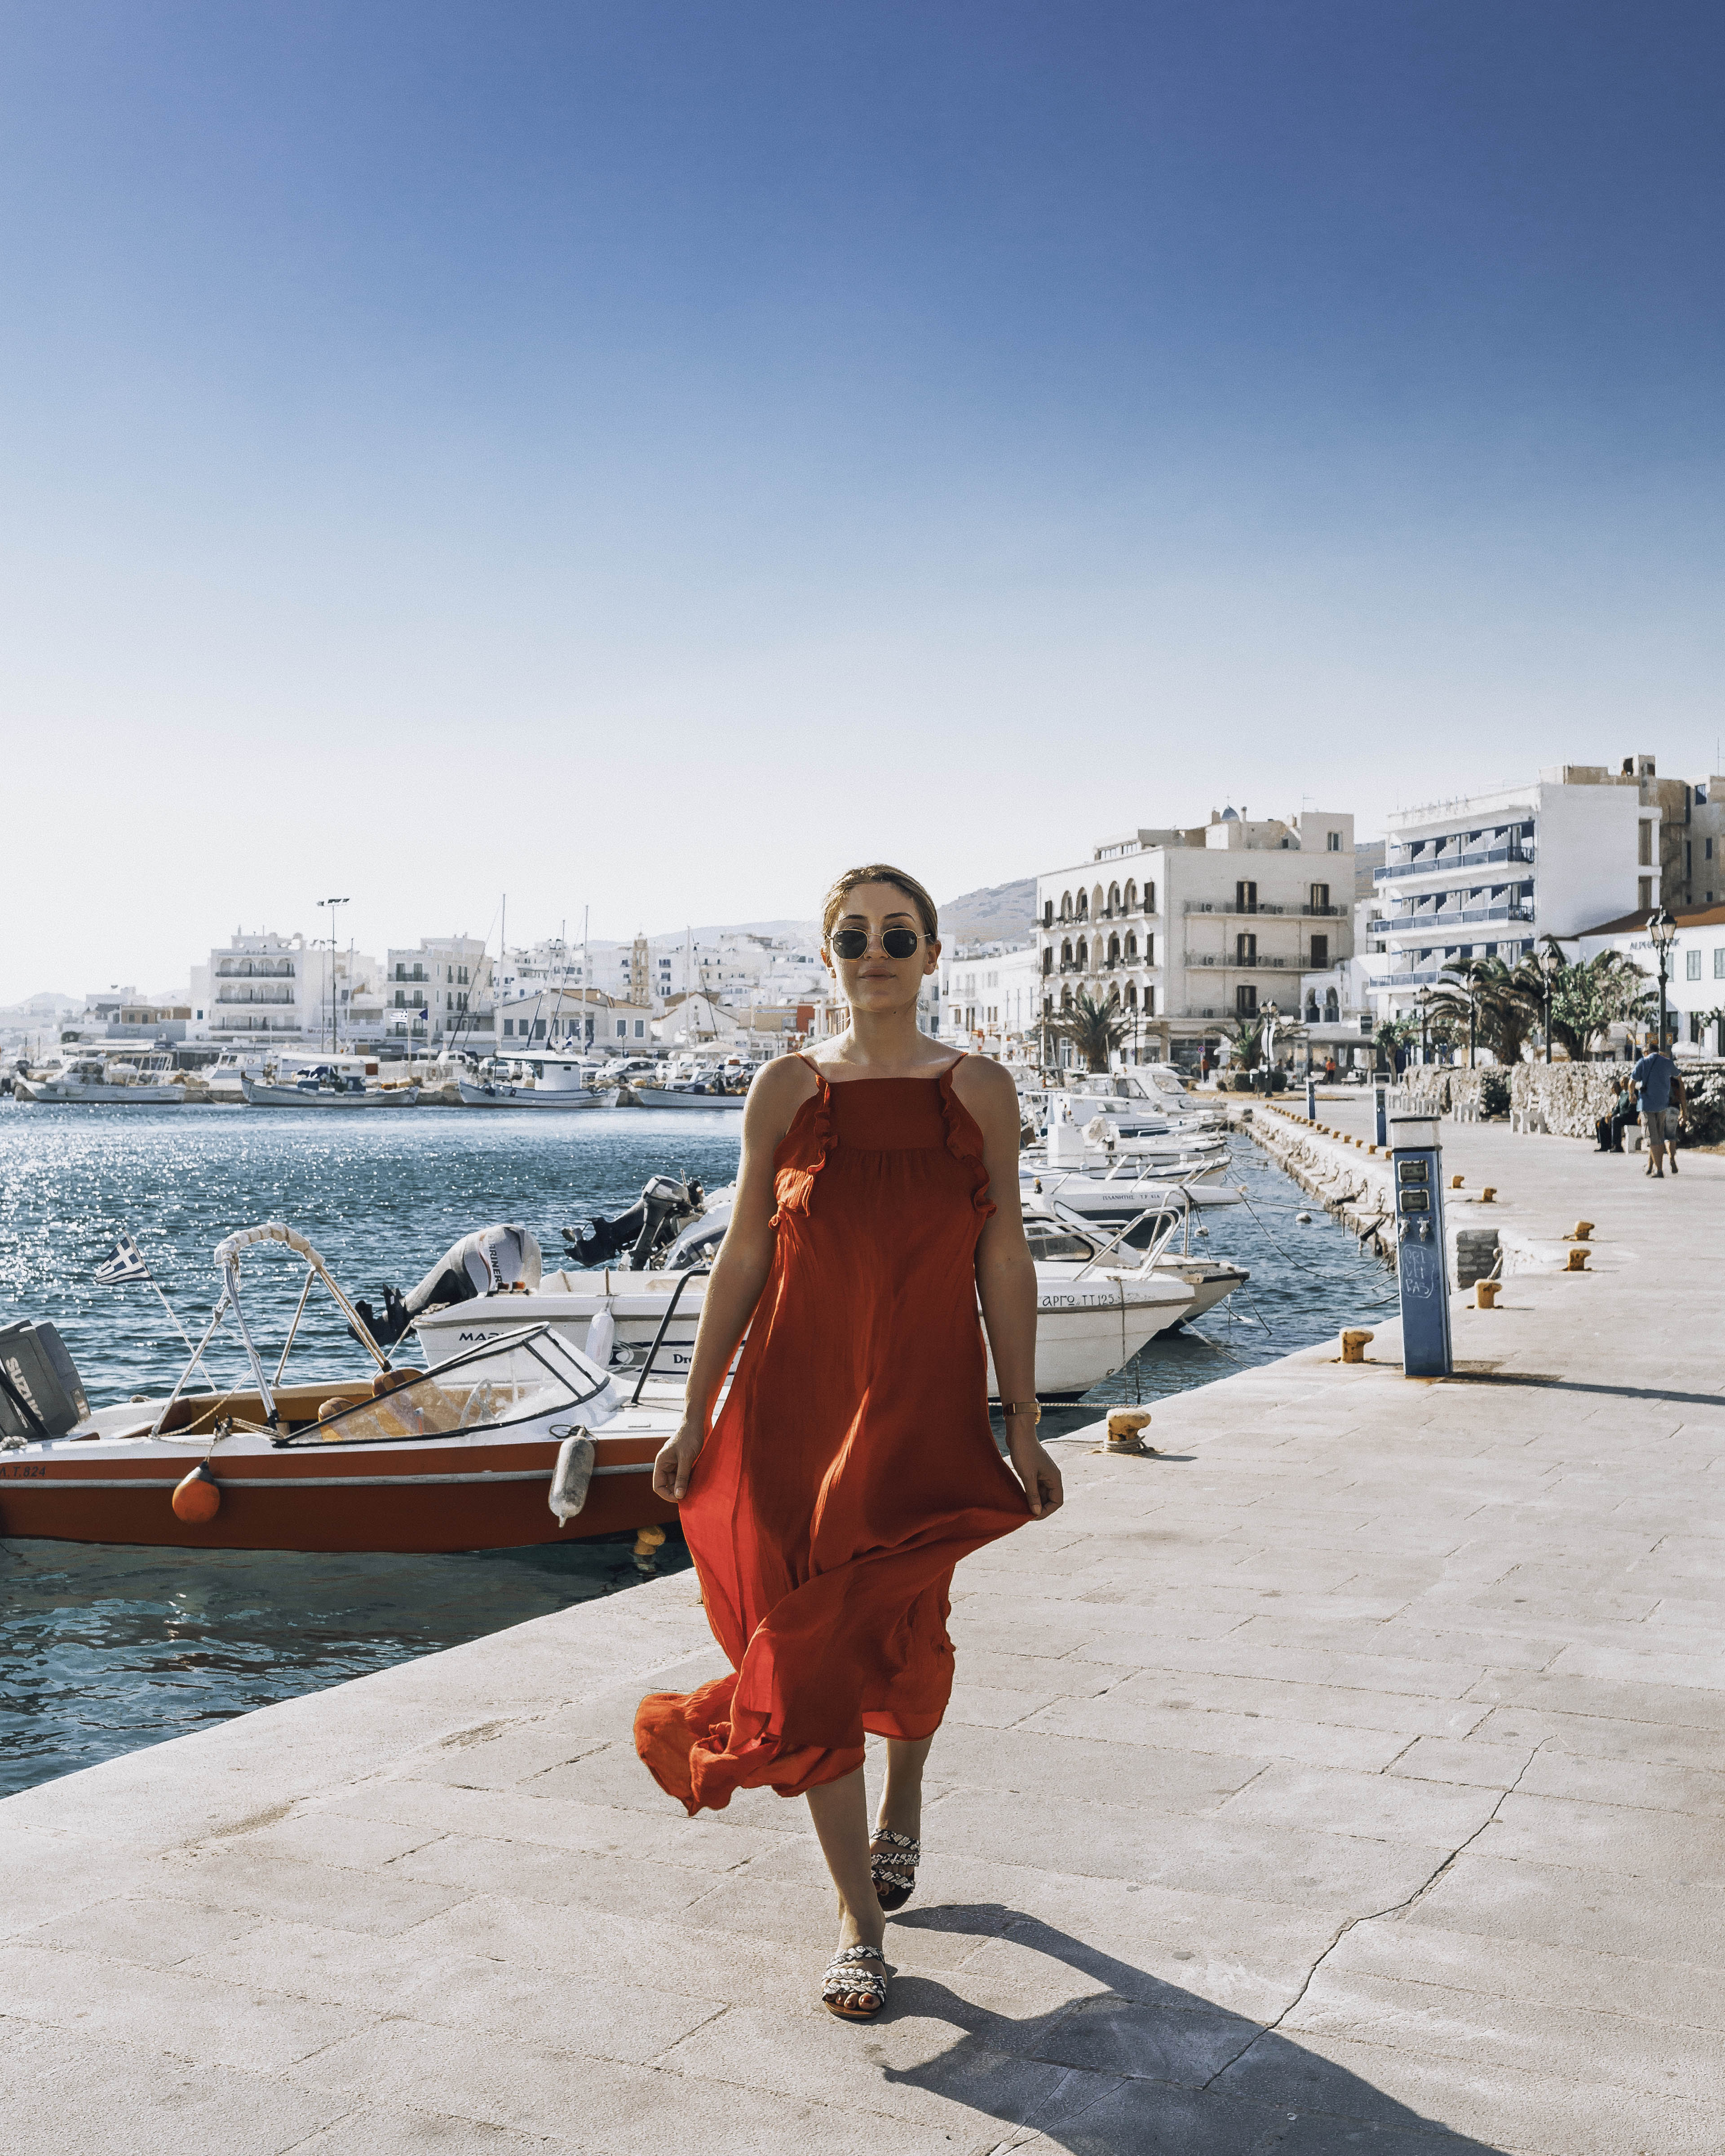 Tinos What I learned from my solo Greece travel